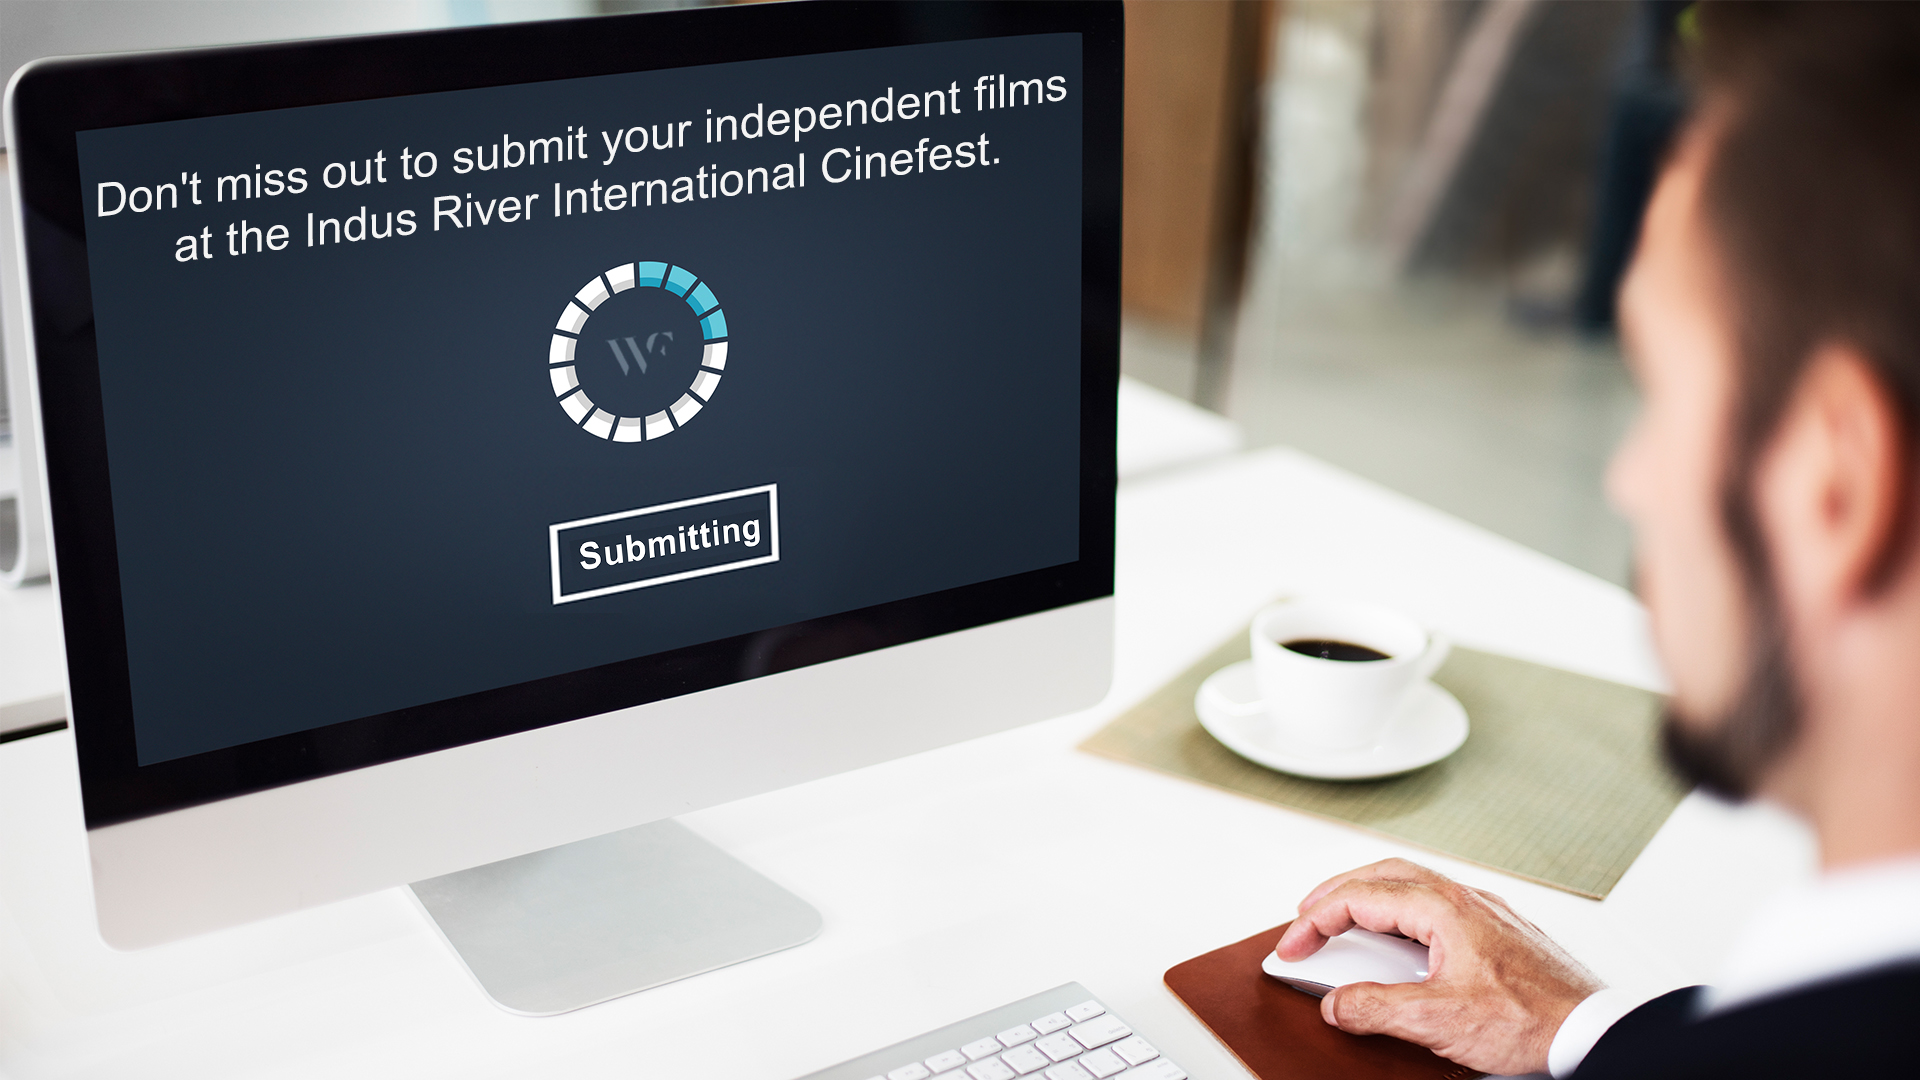 Hurry Up! Last chance to submit your films to the Indus River International Cinefest